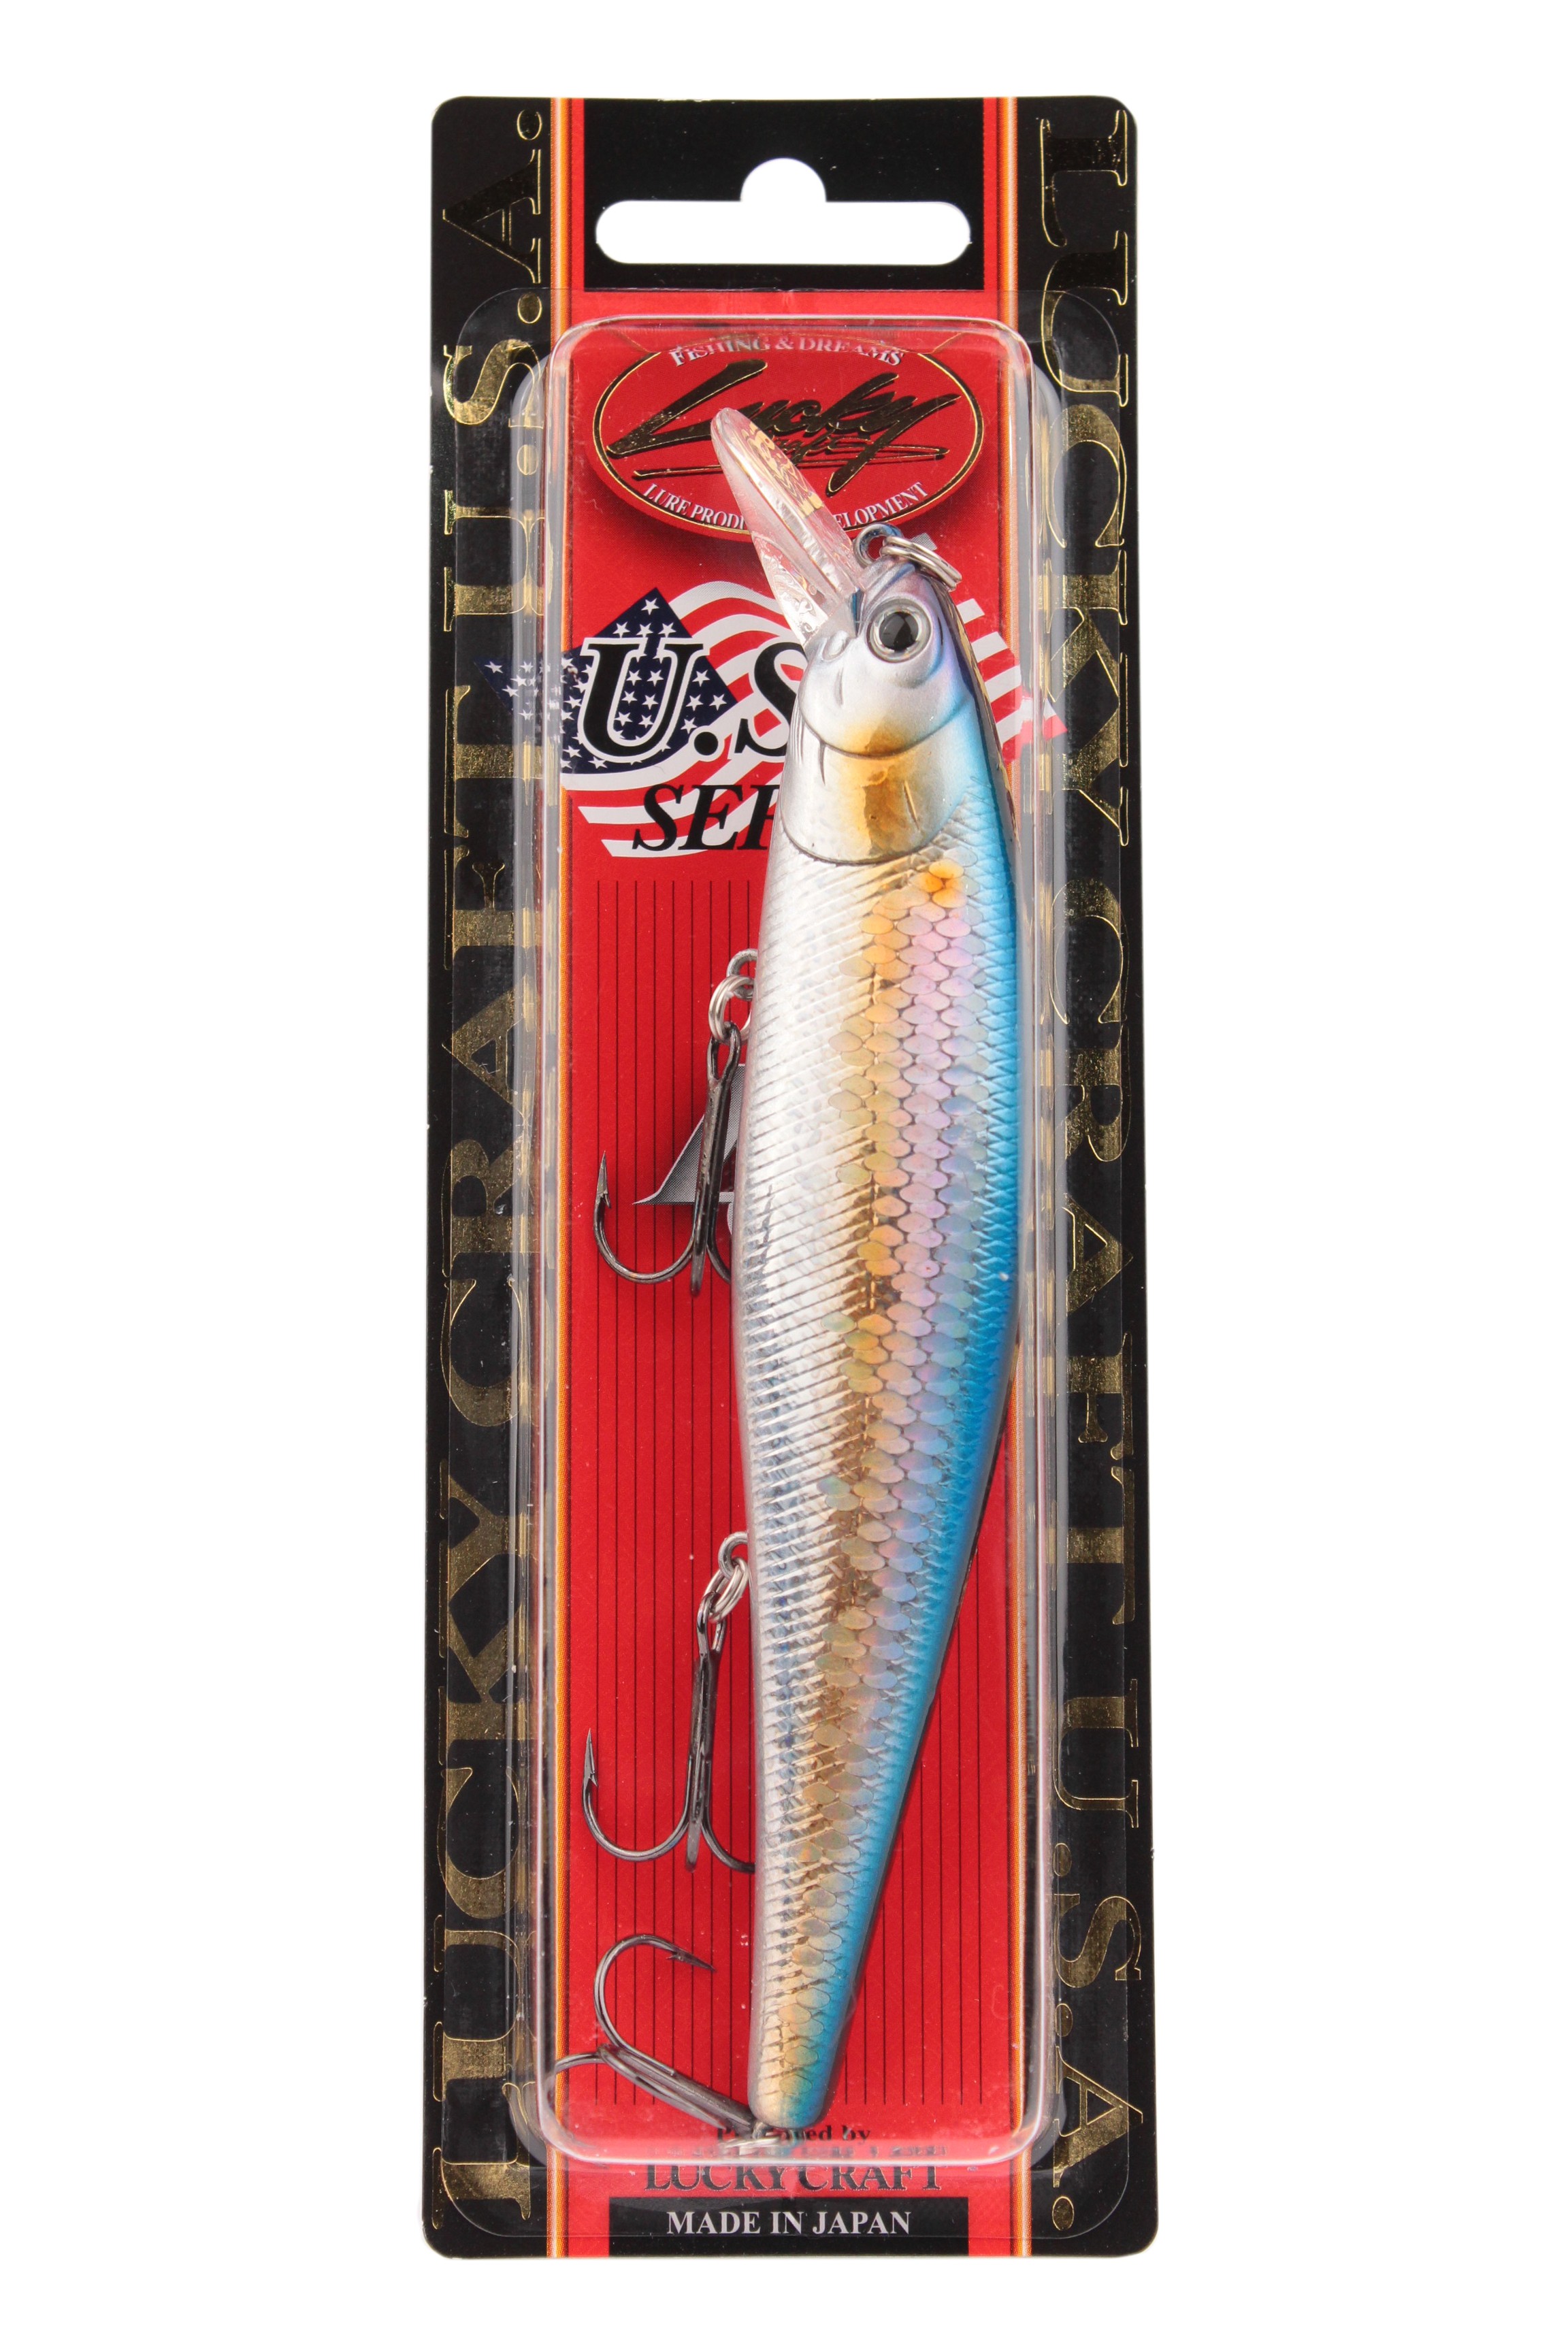 Воблер Lucky Craft Pointer 128-270 MS American Shad